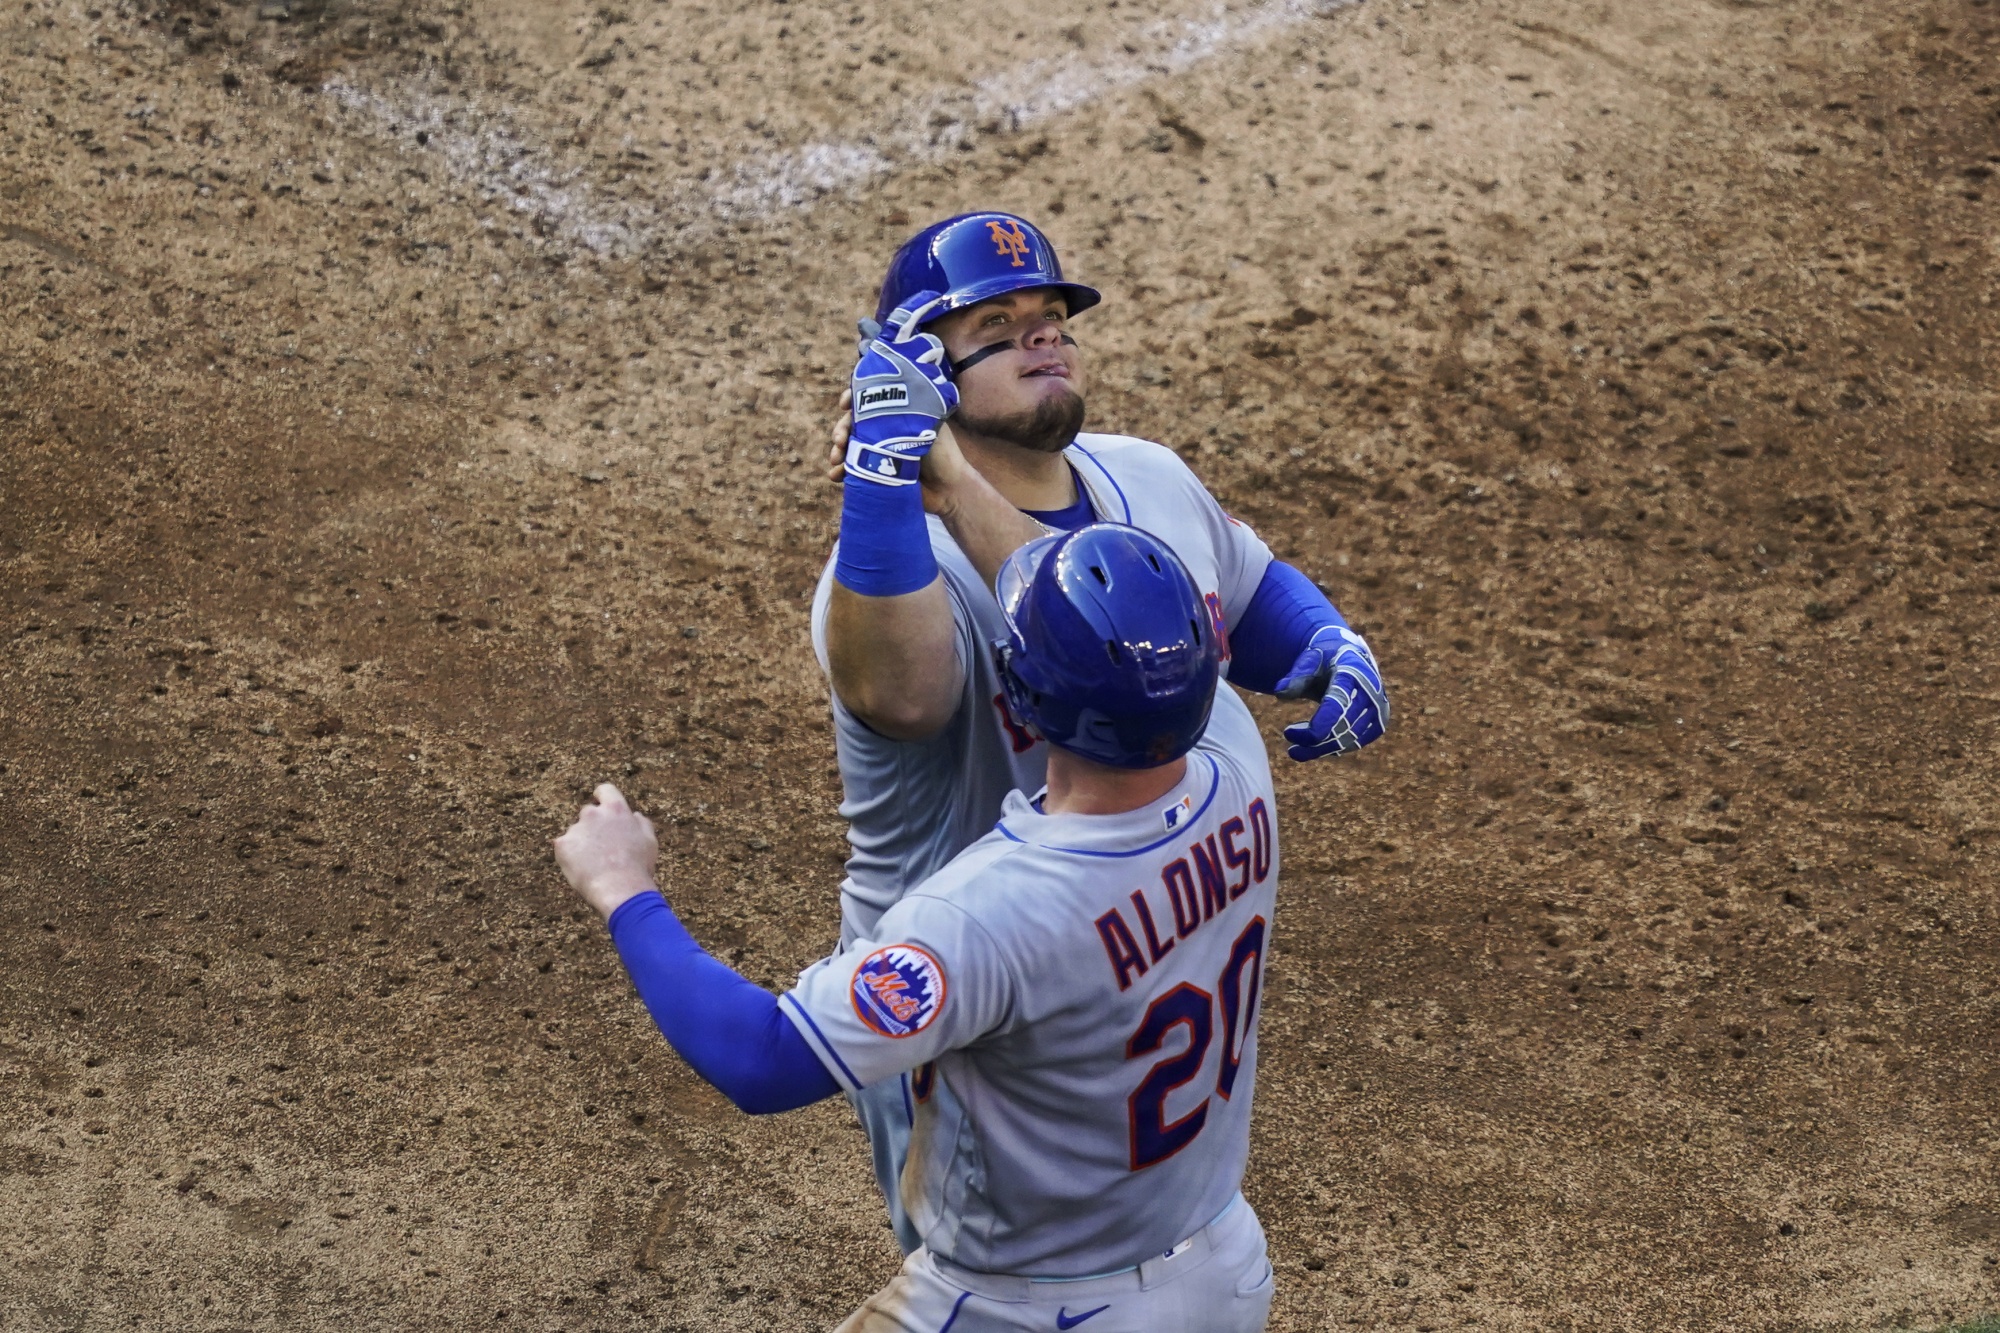 Vogelbach's Slam, Alonso's HR Send Mets Past Nationals 9-5 - Bloomberg